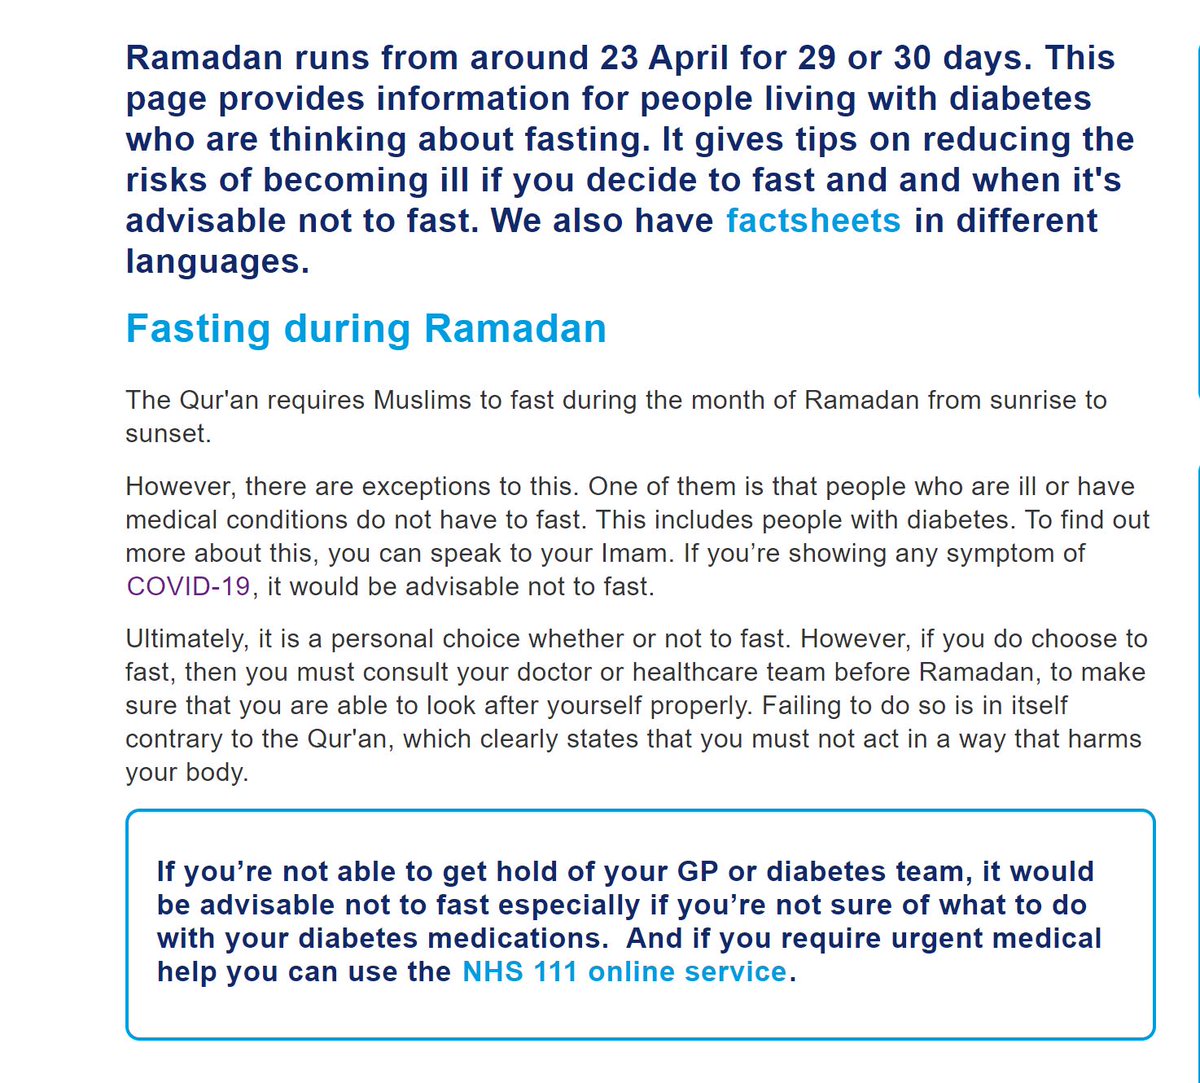 Don’t forget  #ramadan from approx 23rd April for 29/30 days.  @DiabetesUK have updated their website with additional information. If you are showing any symptom of  #COVID19 it is advisable not to fast. https://www.diabetes.org.uk/guide-to-diabetes/managing-your-diabetes/ramadanThread 9/10